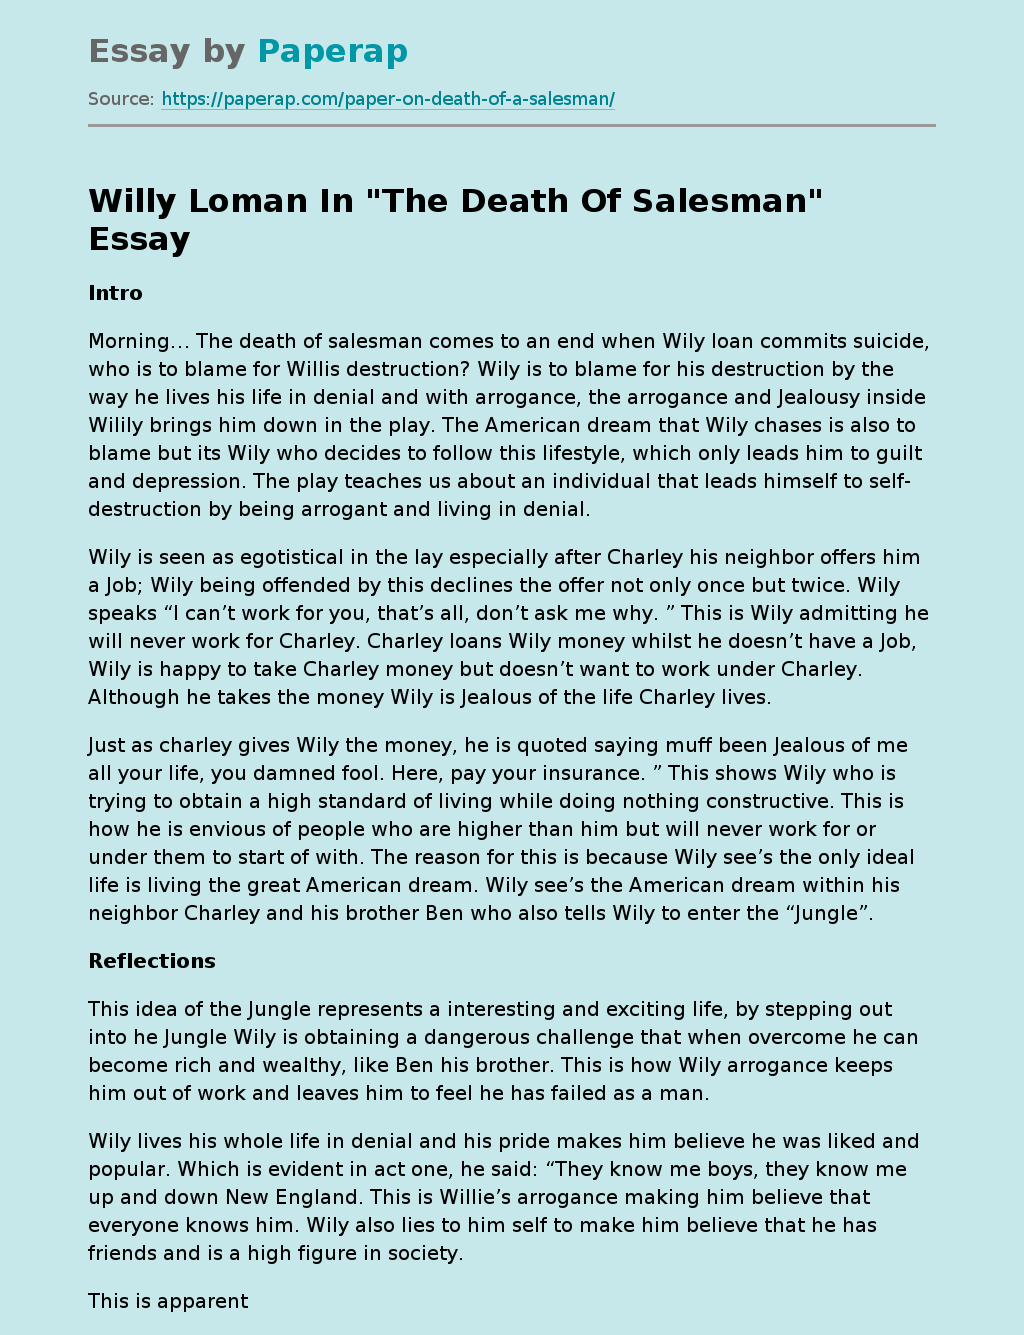 Willy Loman In "The Death Of Salesman"